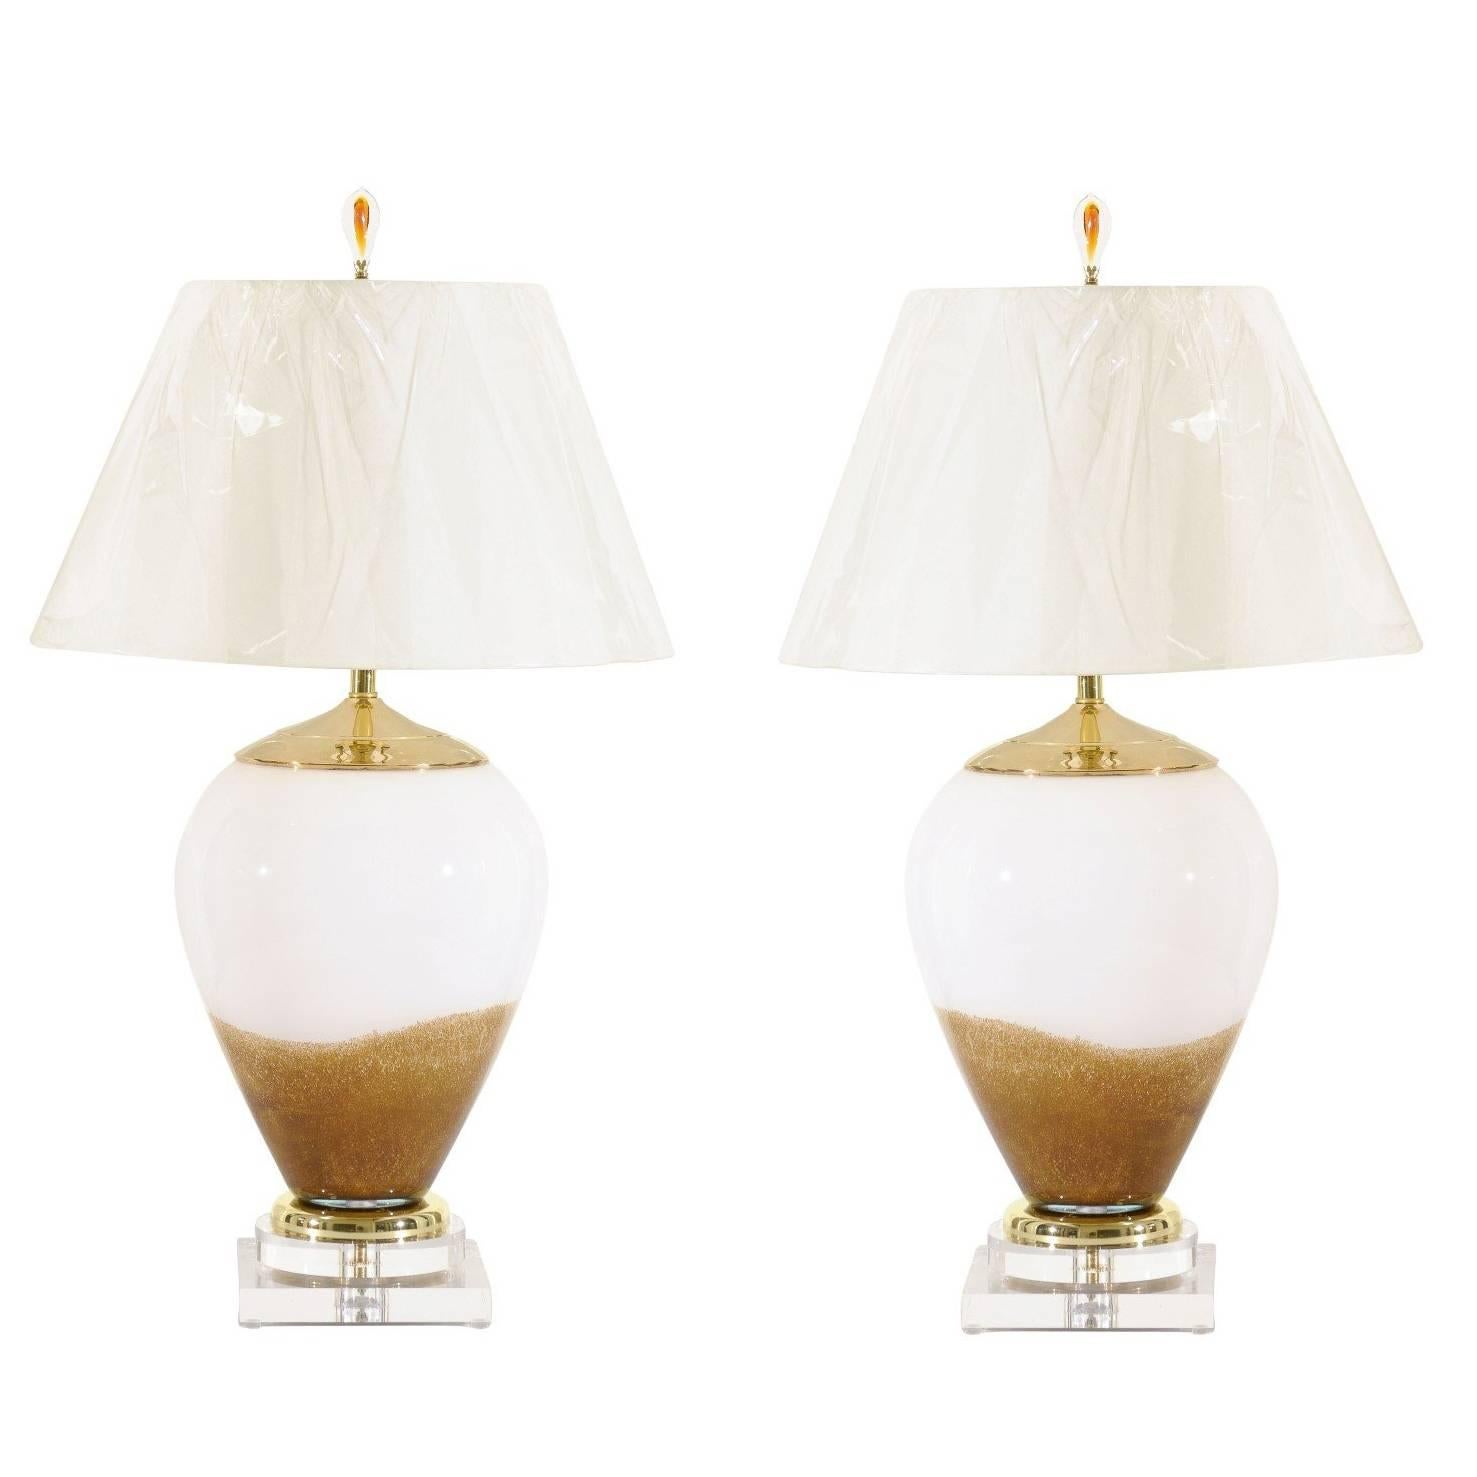 Exceptional Pair of Blown Glass Lamps in Caramel and Cream, Poland, circa 1990 For Sale